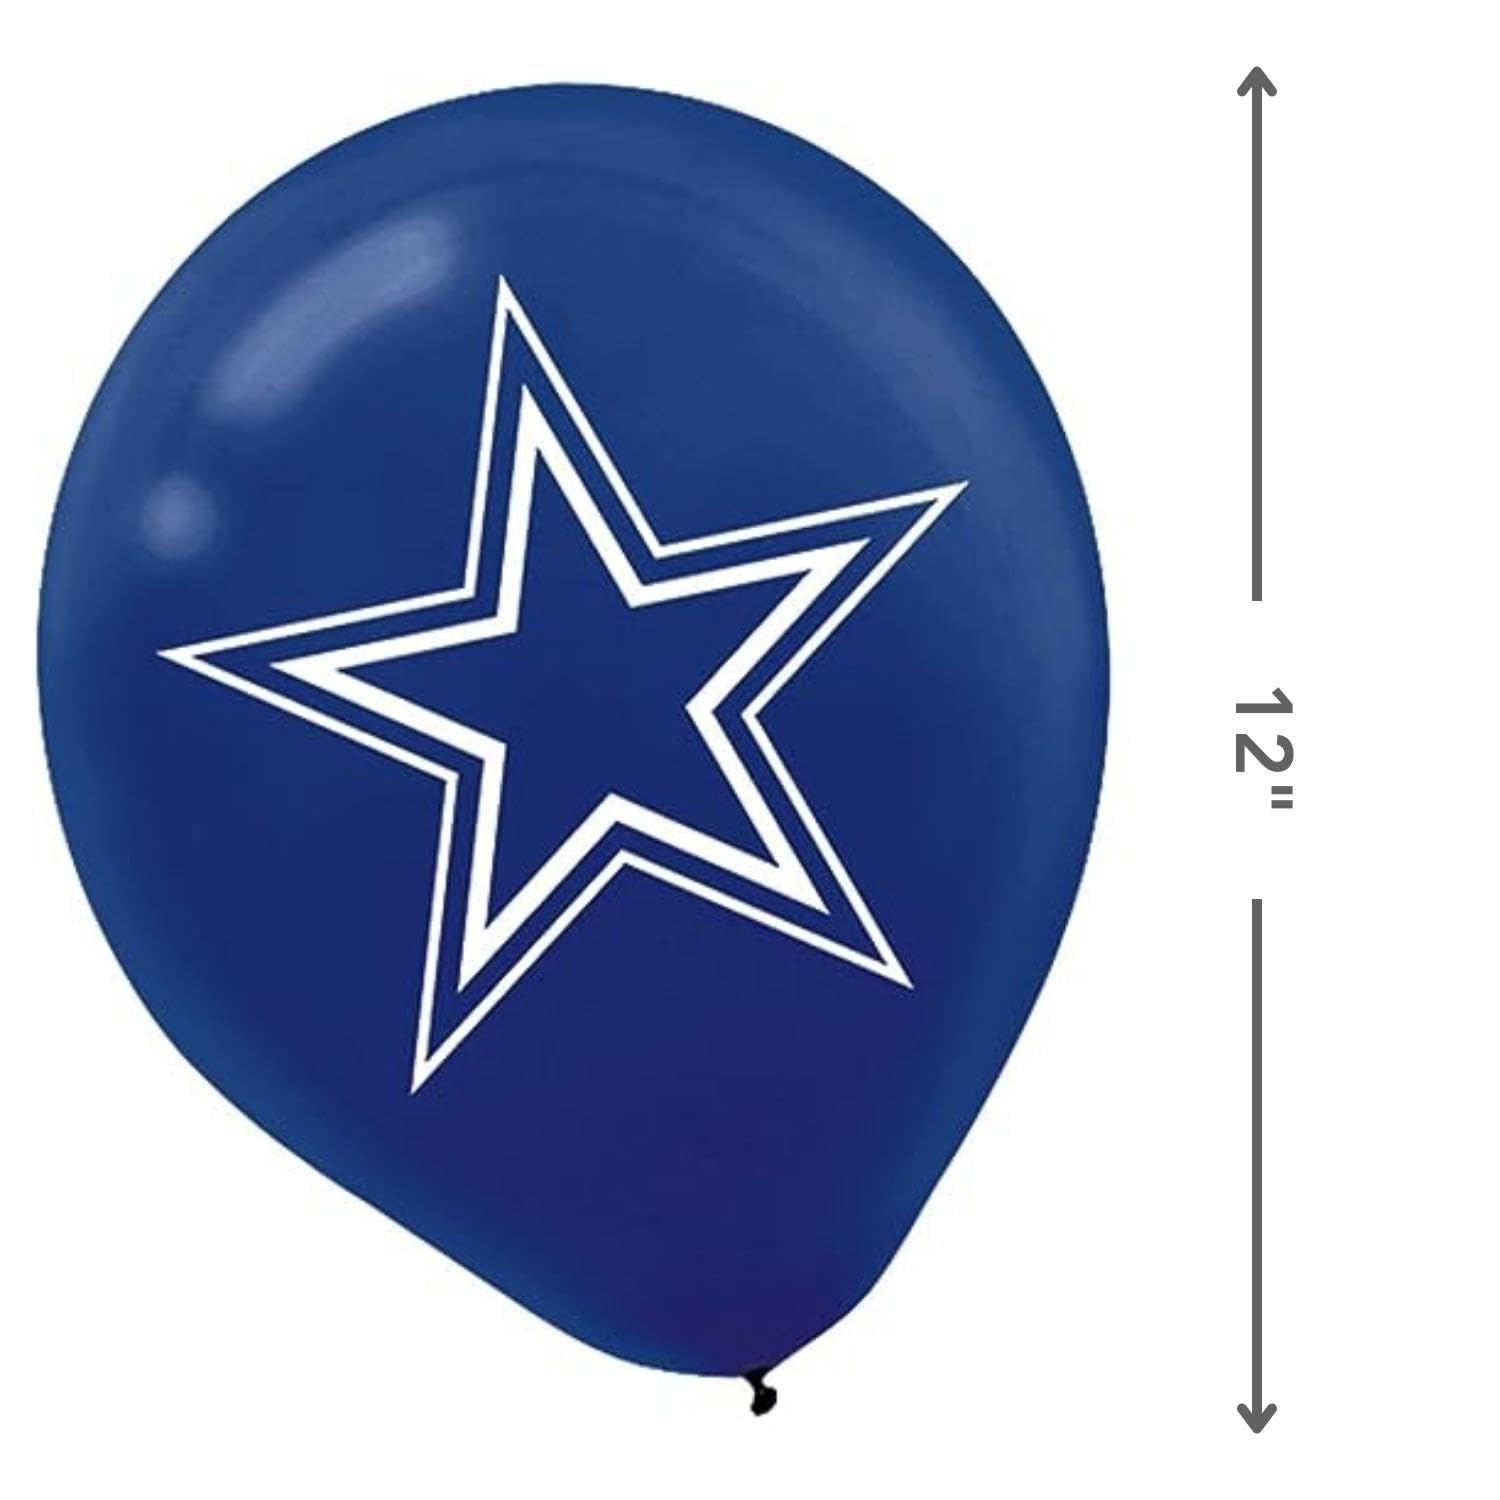 Dallas Cowboys Navy Blue Latex Balloons - 12" (6 Pack) - Unique, Durable & Eye-catching - Perfect For Game Day Parties & Decorations